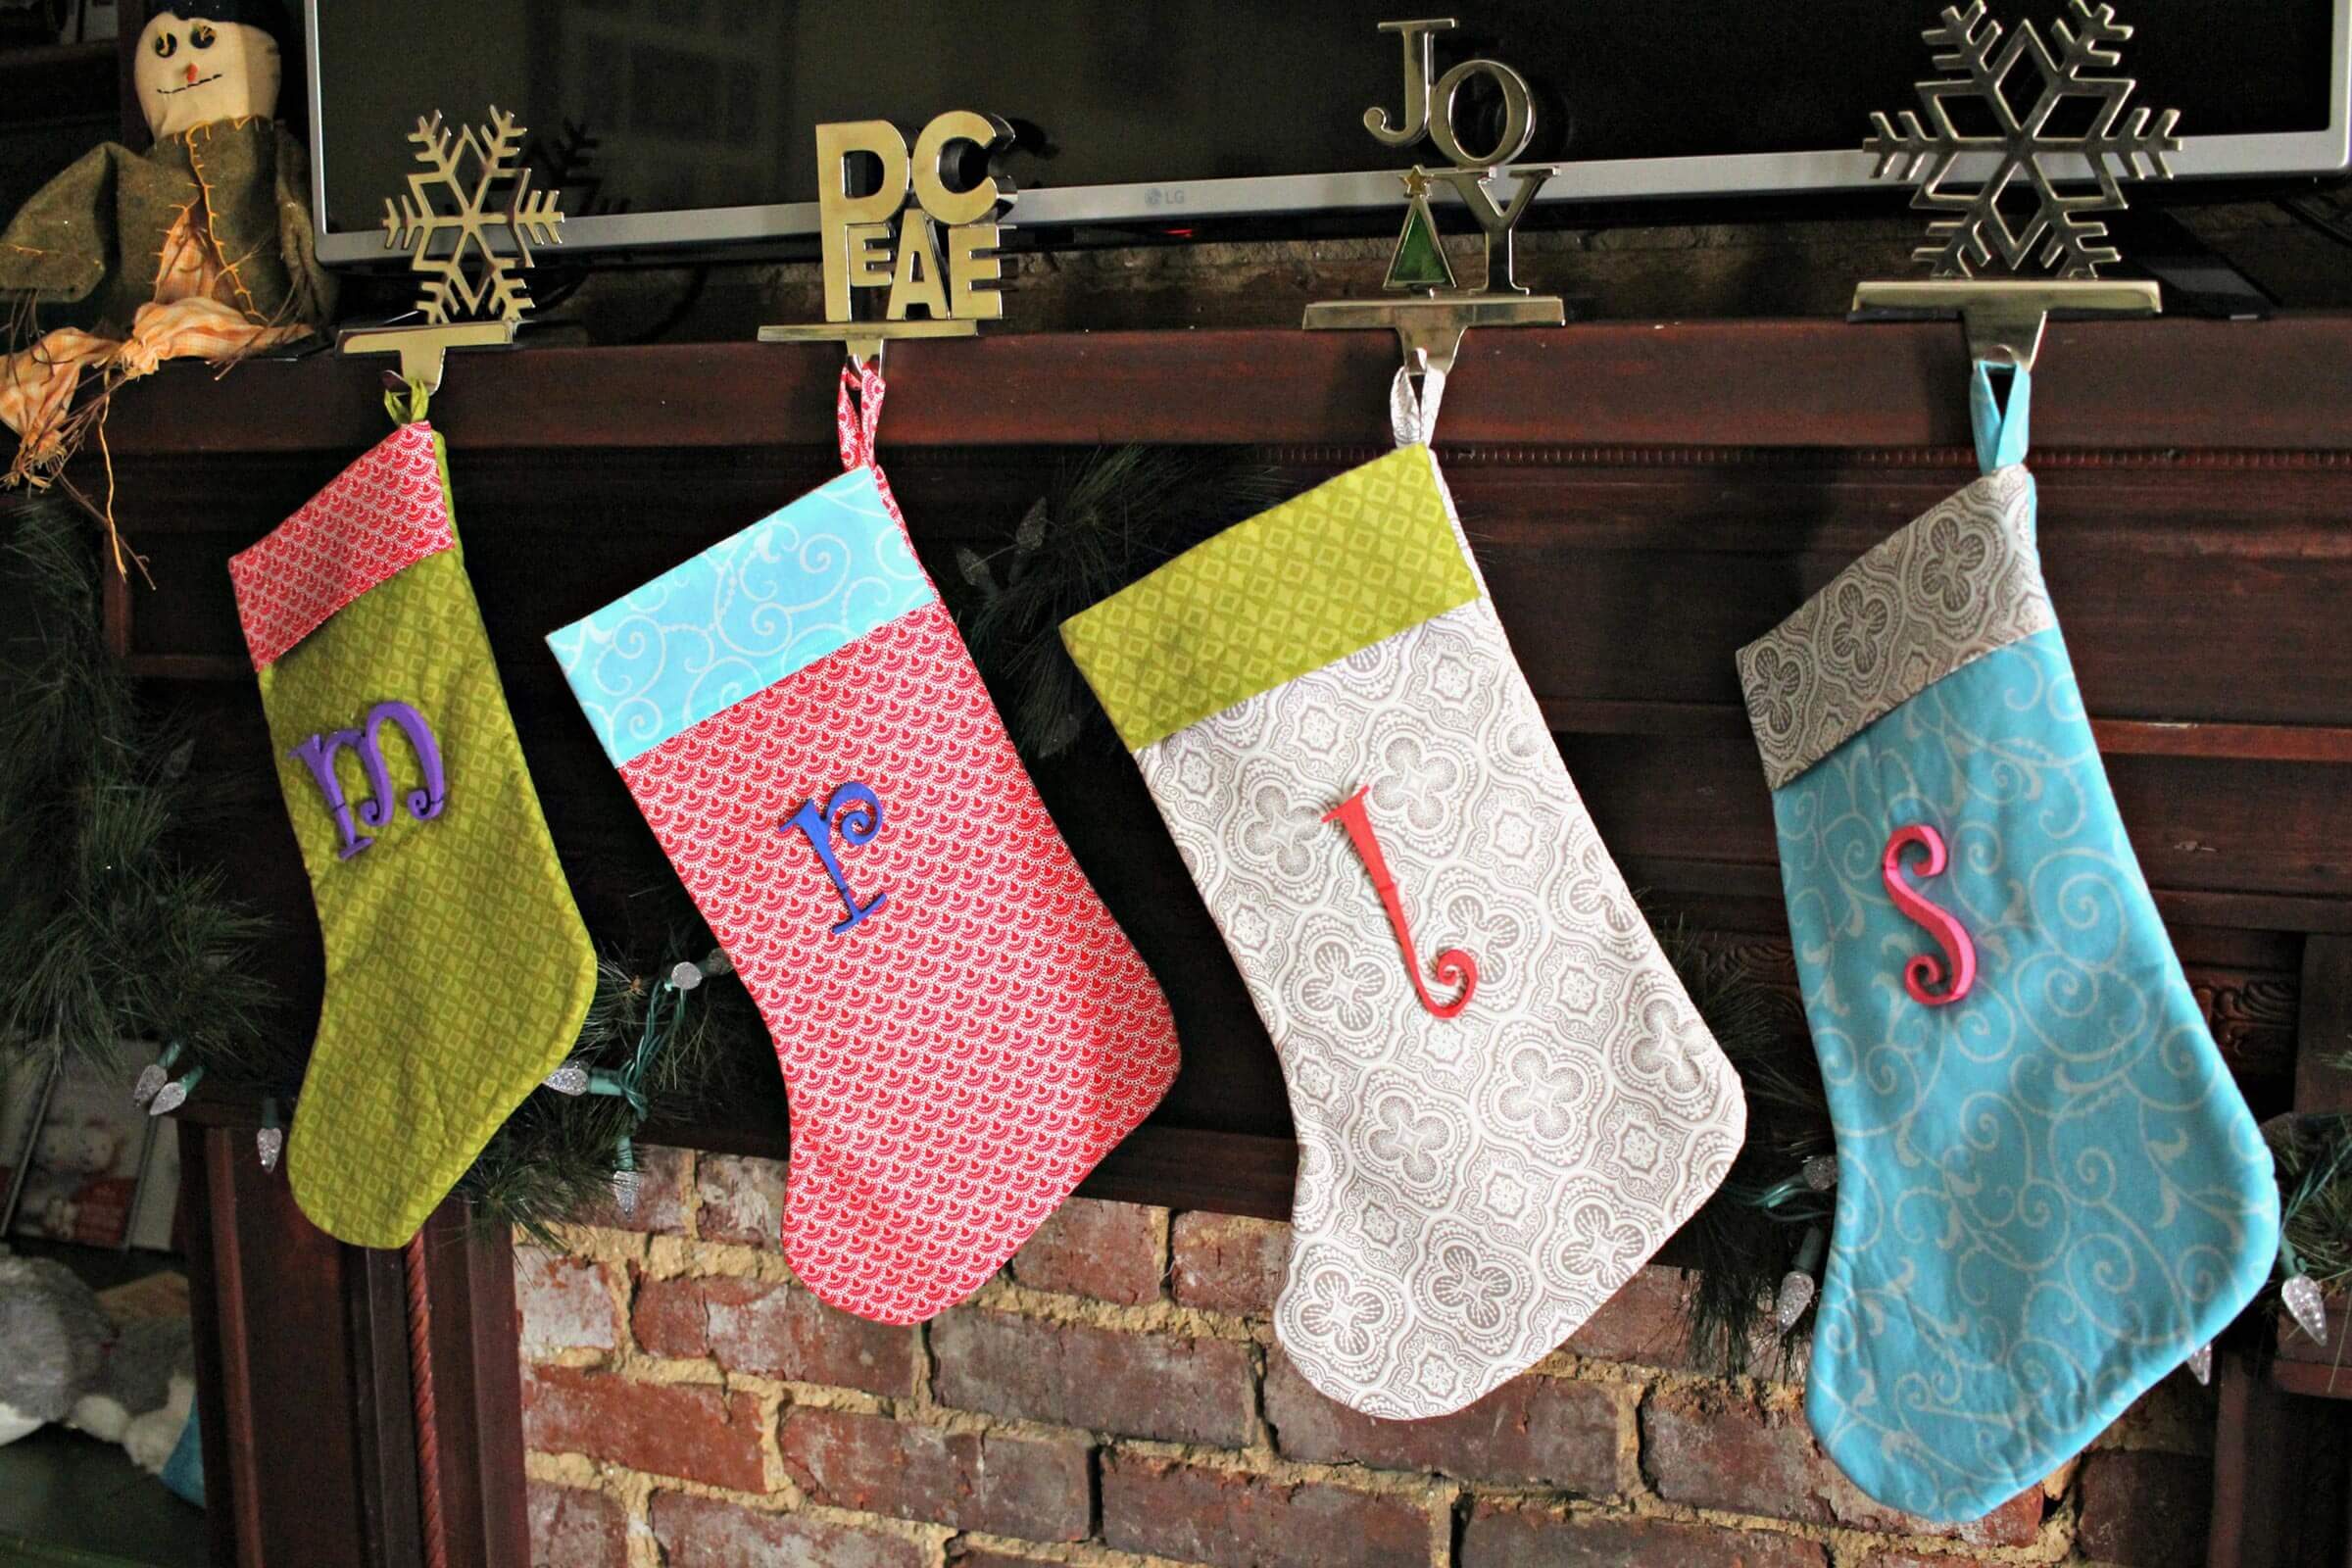 https://www.rd.com/wp-content/uploads/2017/12/14_Christmas-Stocking_26-Handmade-Gifts-for-Everyone-on-Your-List-Lindsey-Galvez.jpg?fit=700%2C467